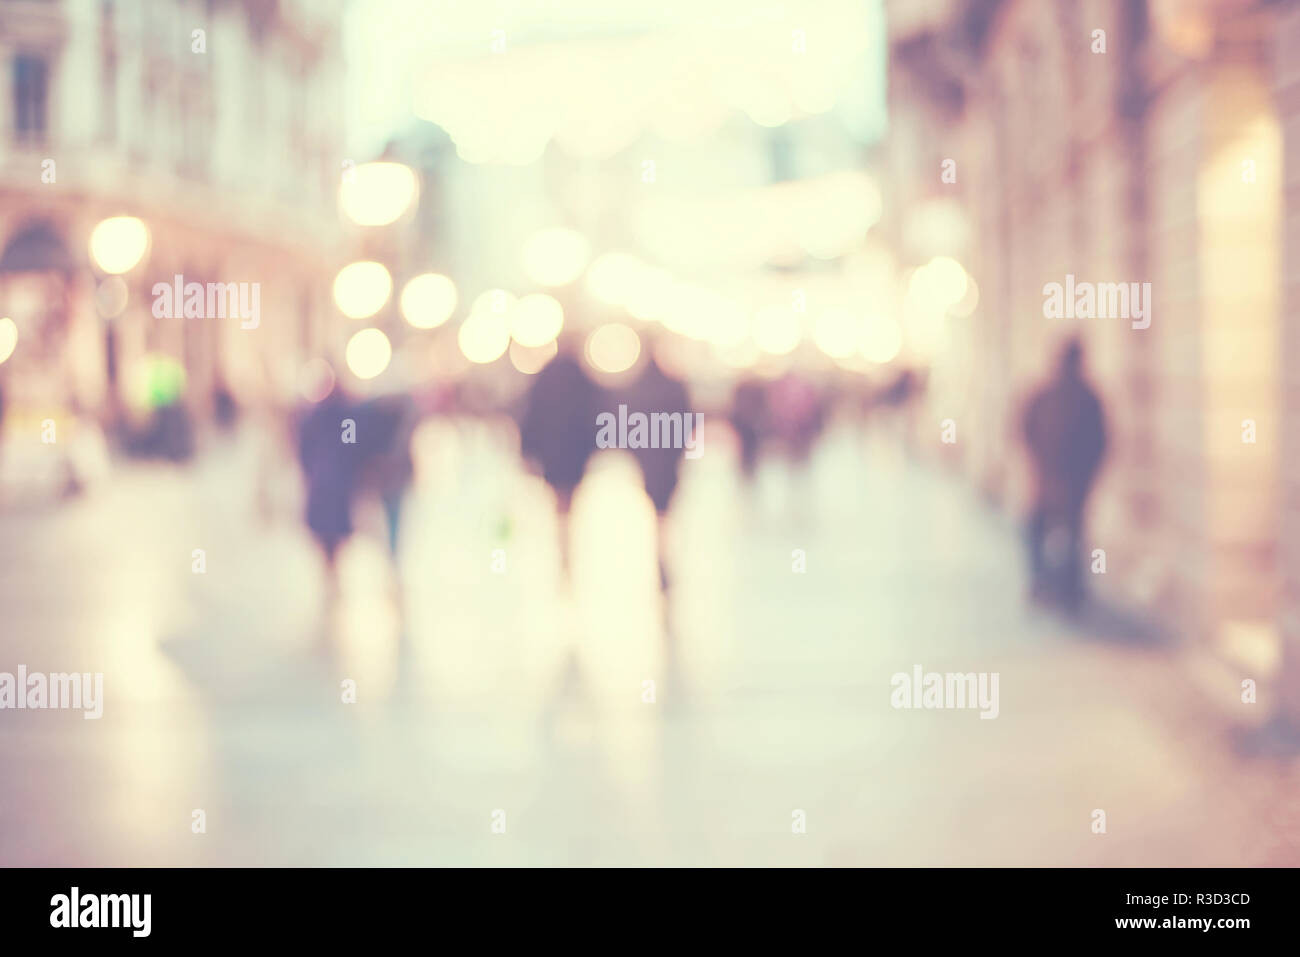 abstract blur people background, silhouettes of unrecognizable people walking on a street in winter evening with bokeh lights Stock Photo